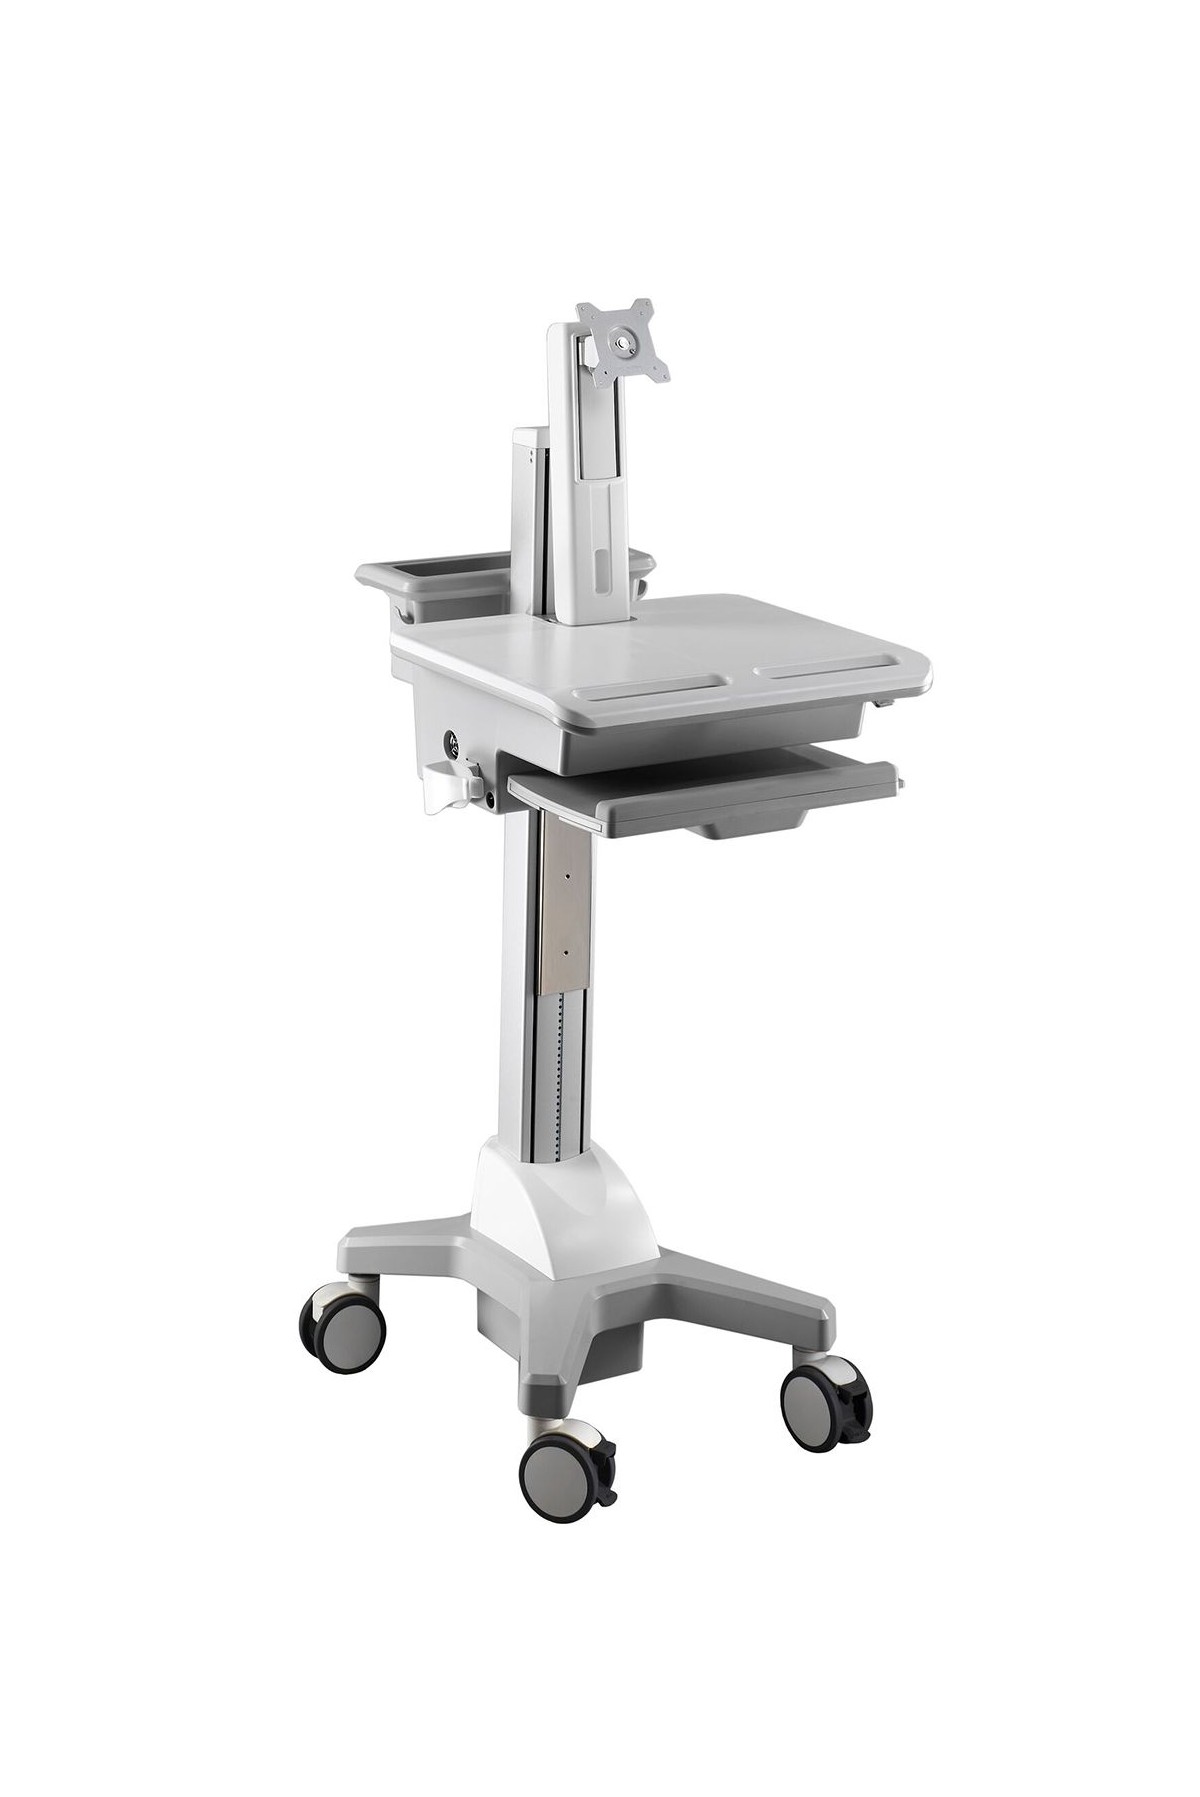 Aavara CNH01 Mobile Medical Cart - Single Monitor with height adjustment Type